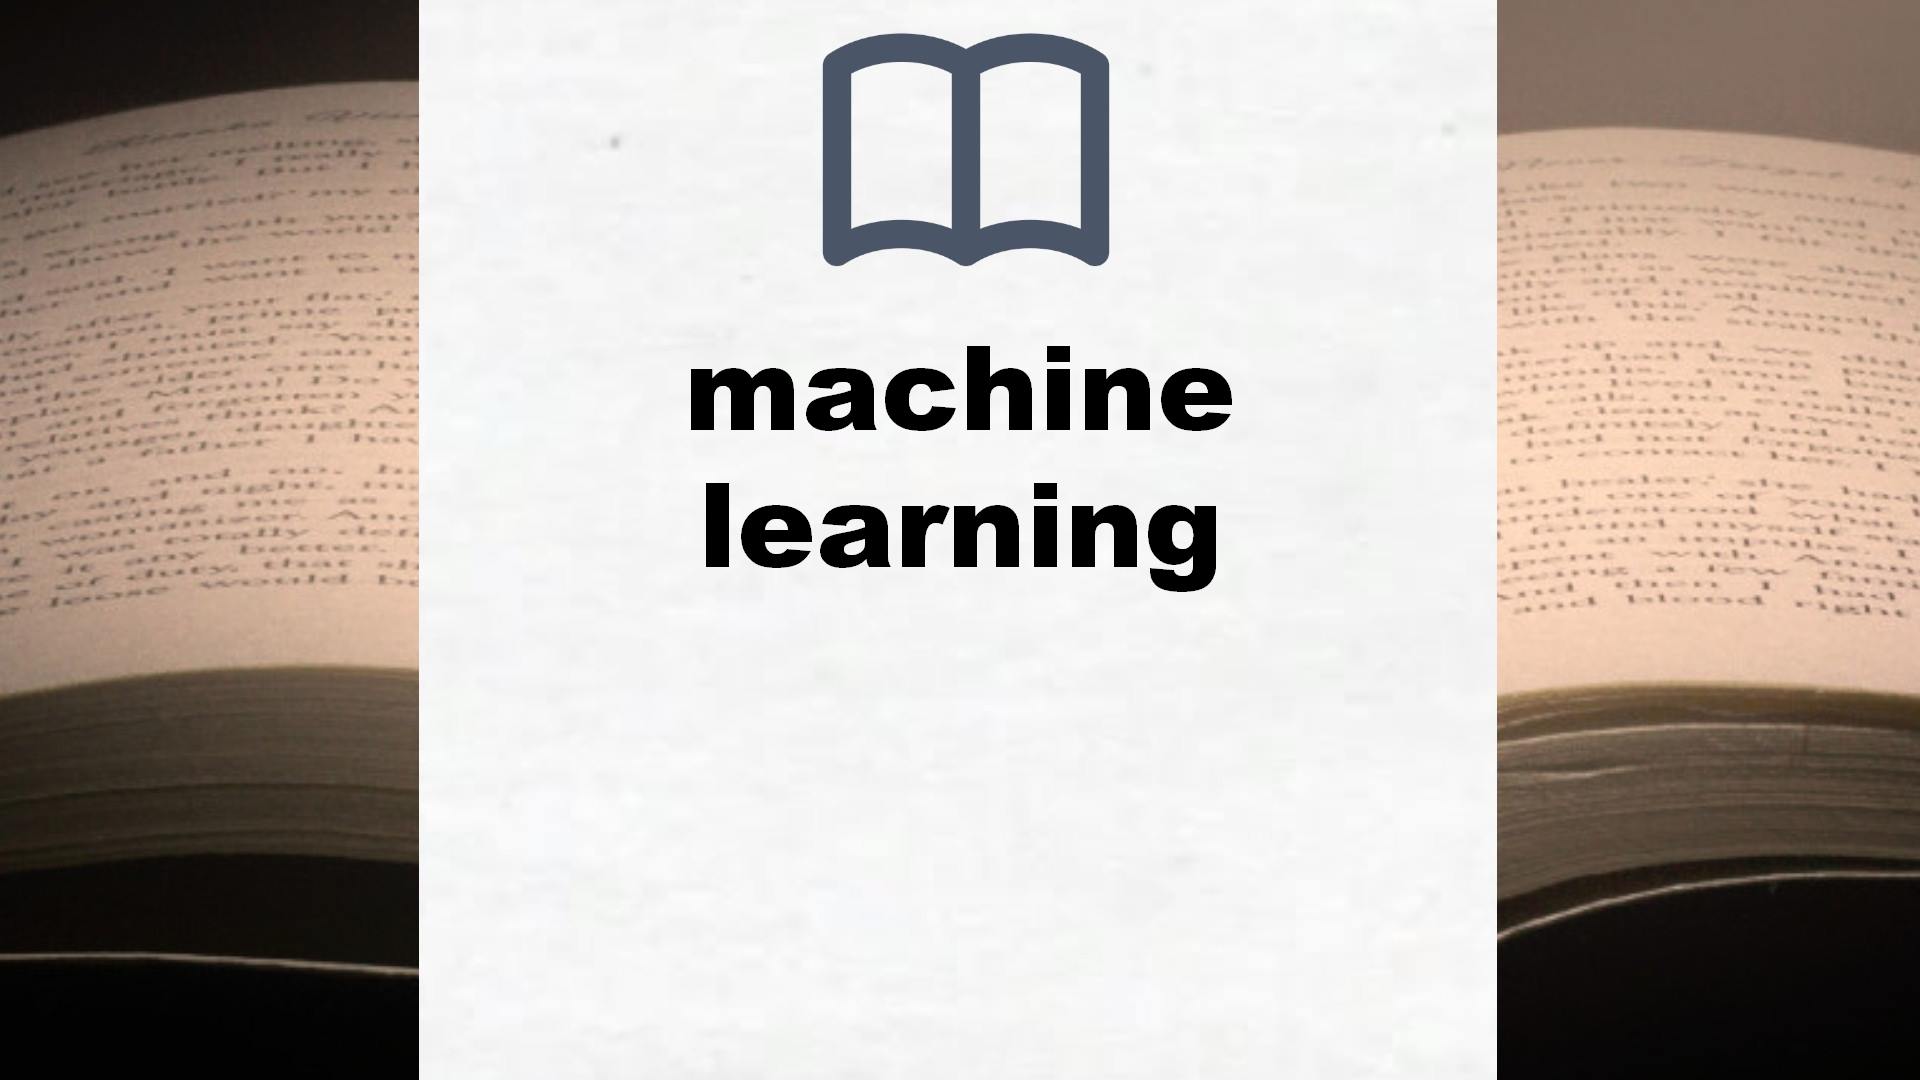 Libros sobre machine learning